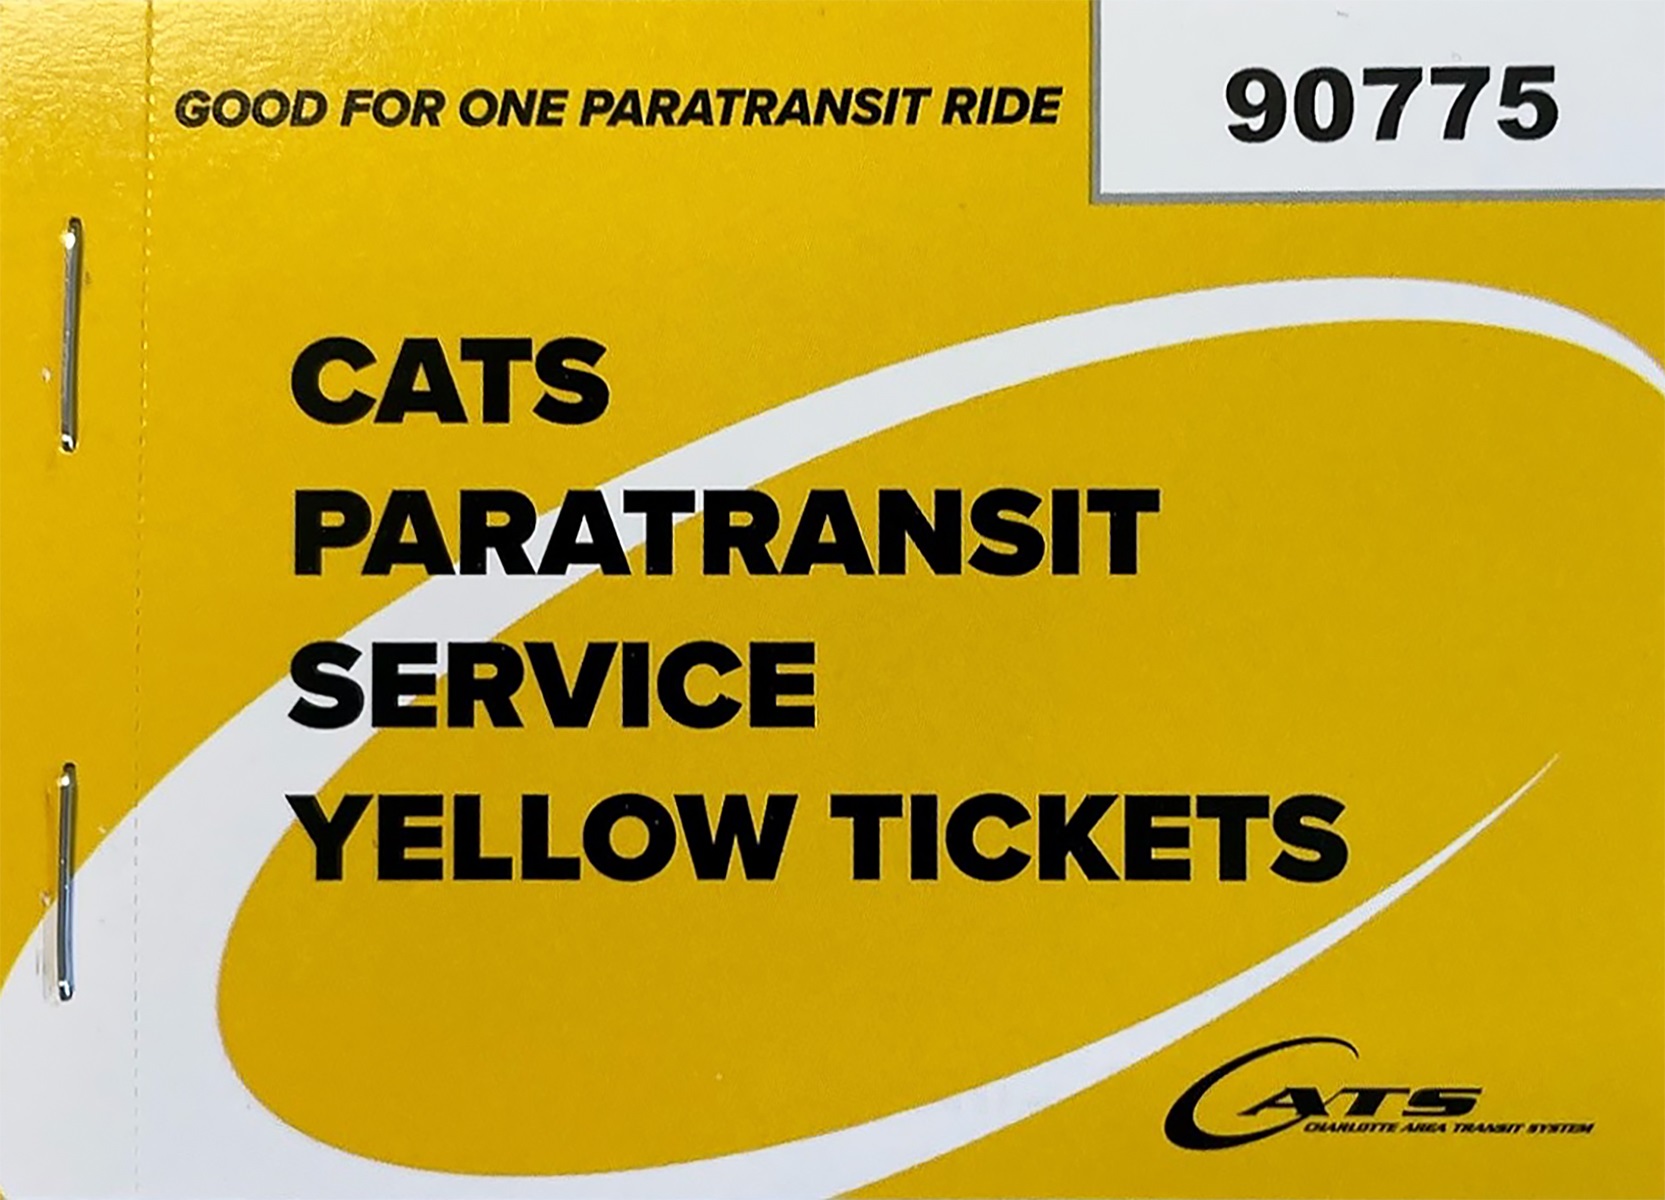 Image of the cover of the paratransit yellow ticket book